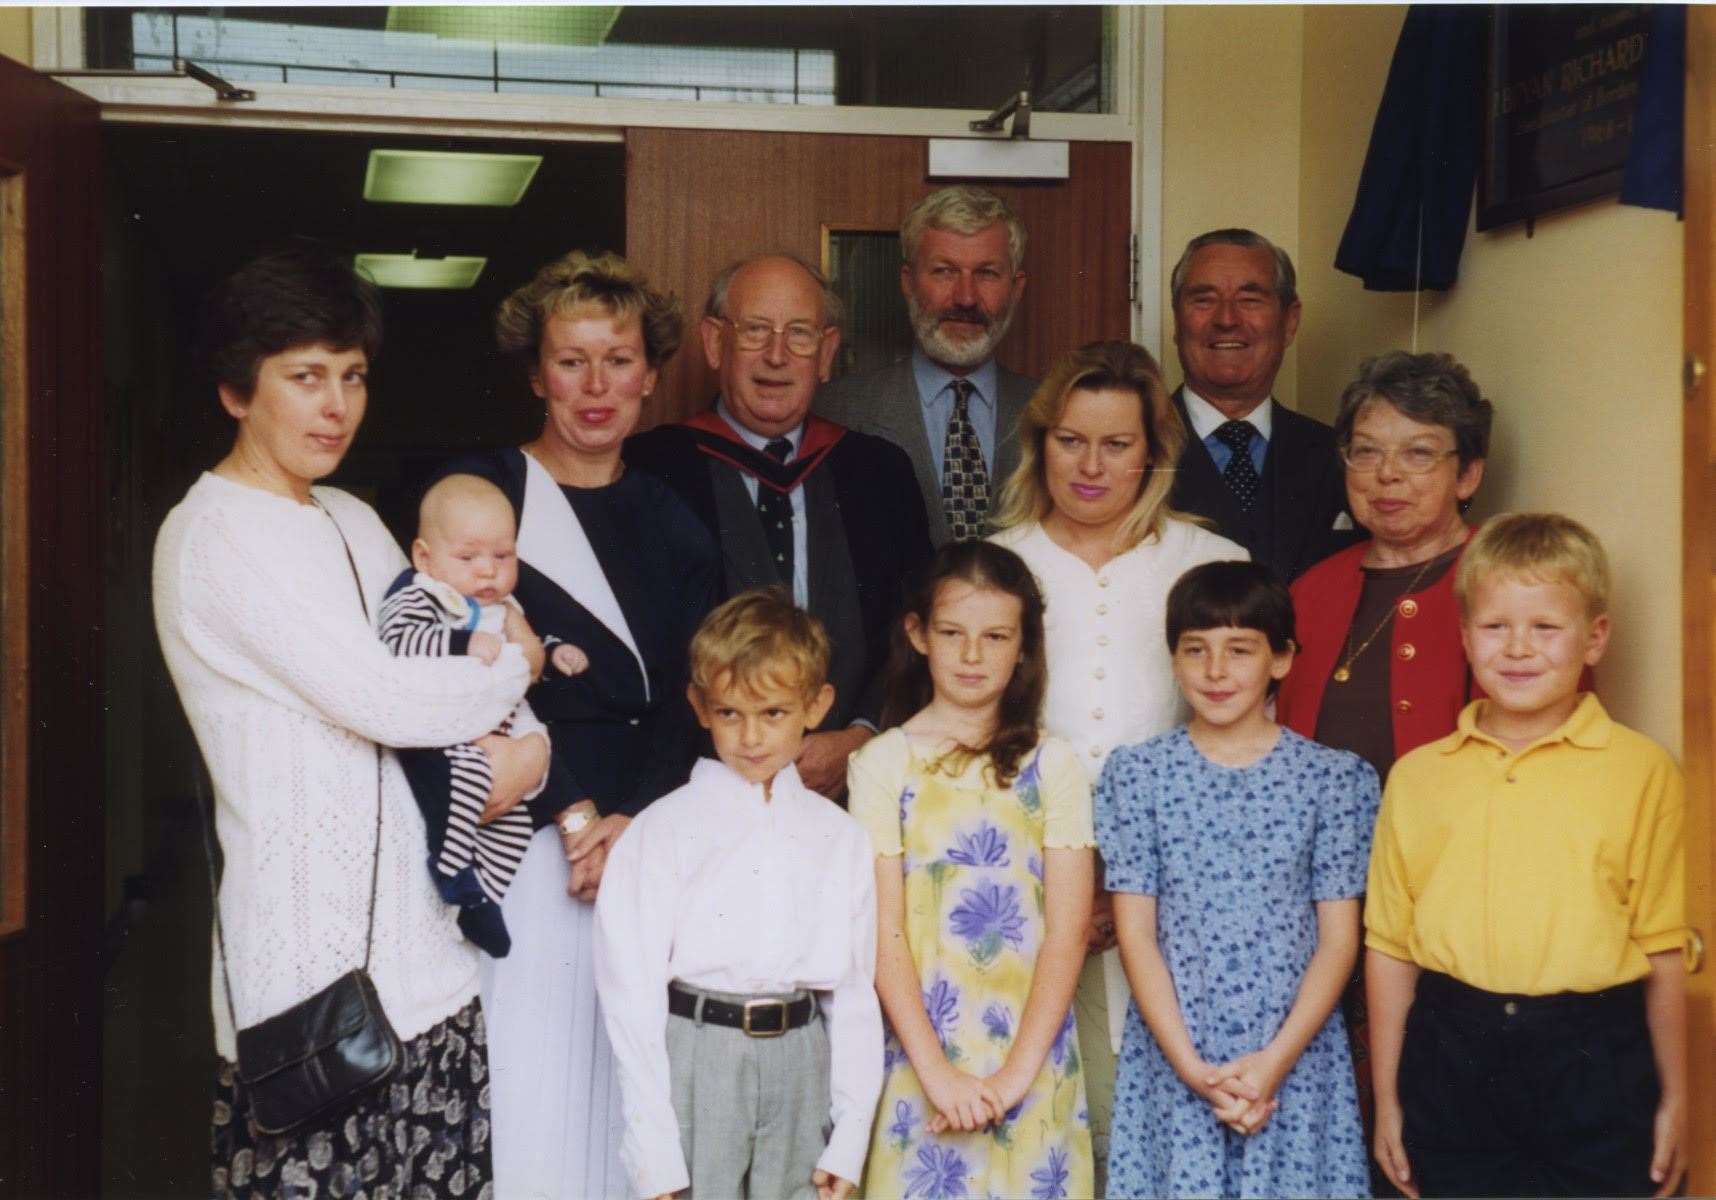 Bryan Short at the opening of the Short block at Borden Grammar in 1998, with Lord Kingsdown, and Mr Short's wife Jeannine on the right in red, with other members of his close family